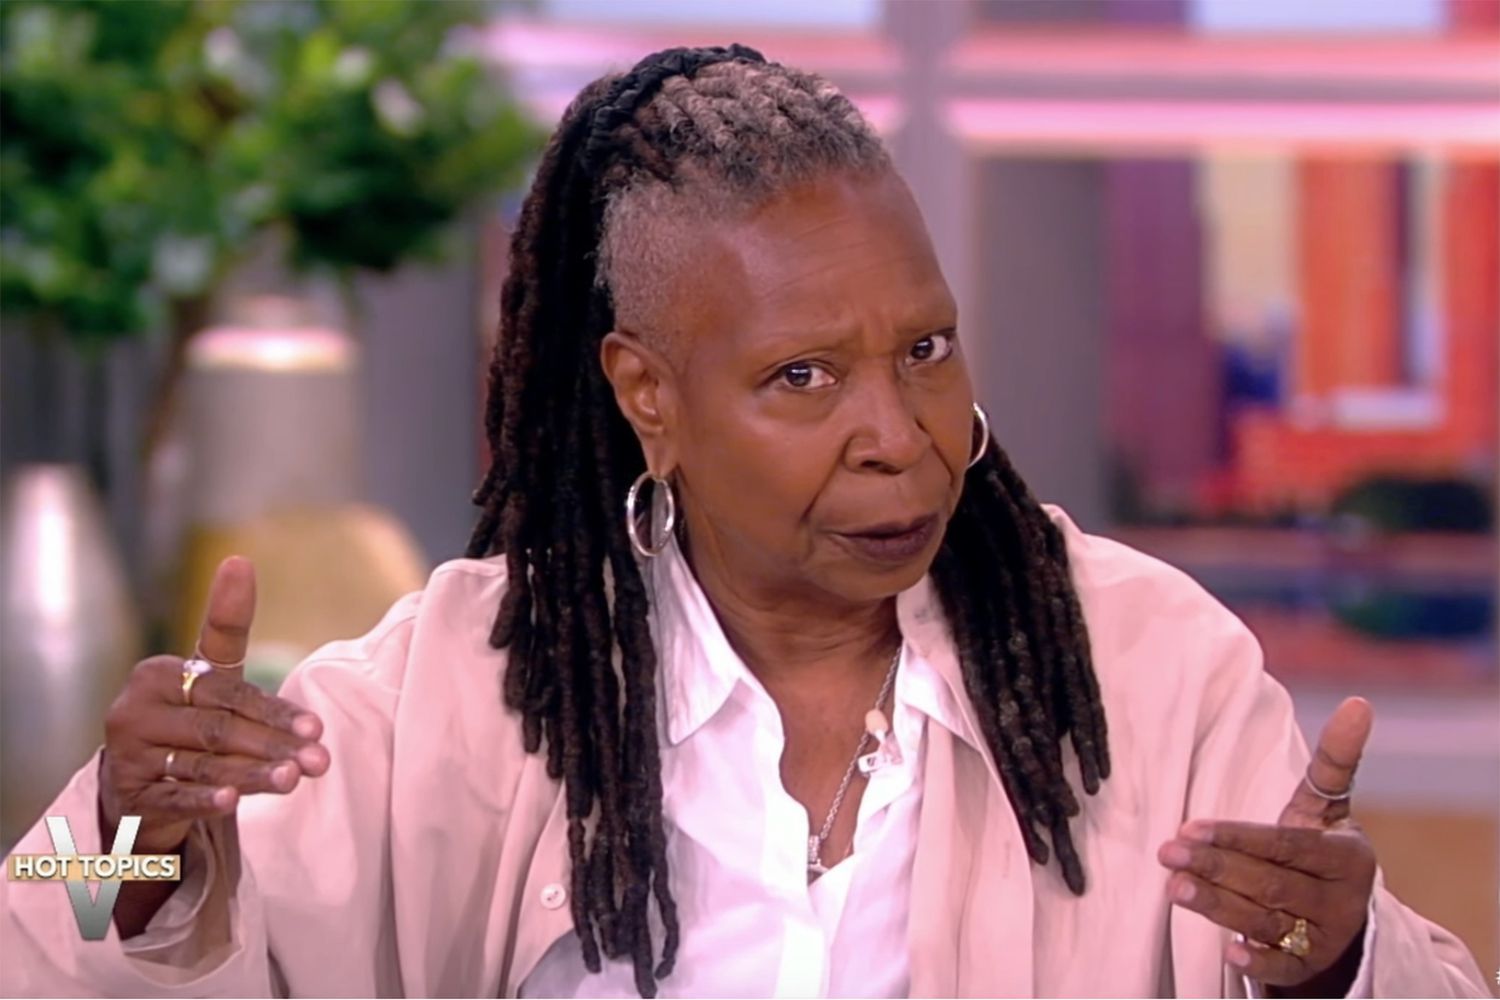 Whoopi Goldberg on The View 